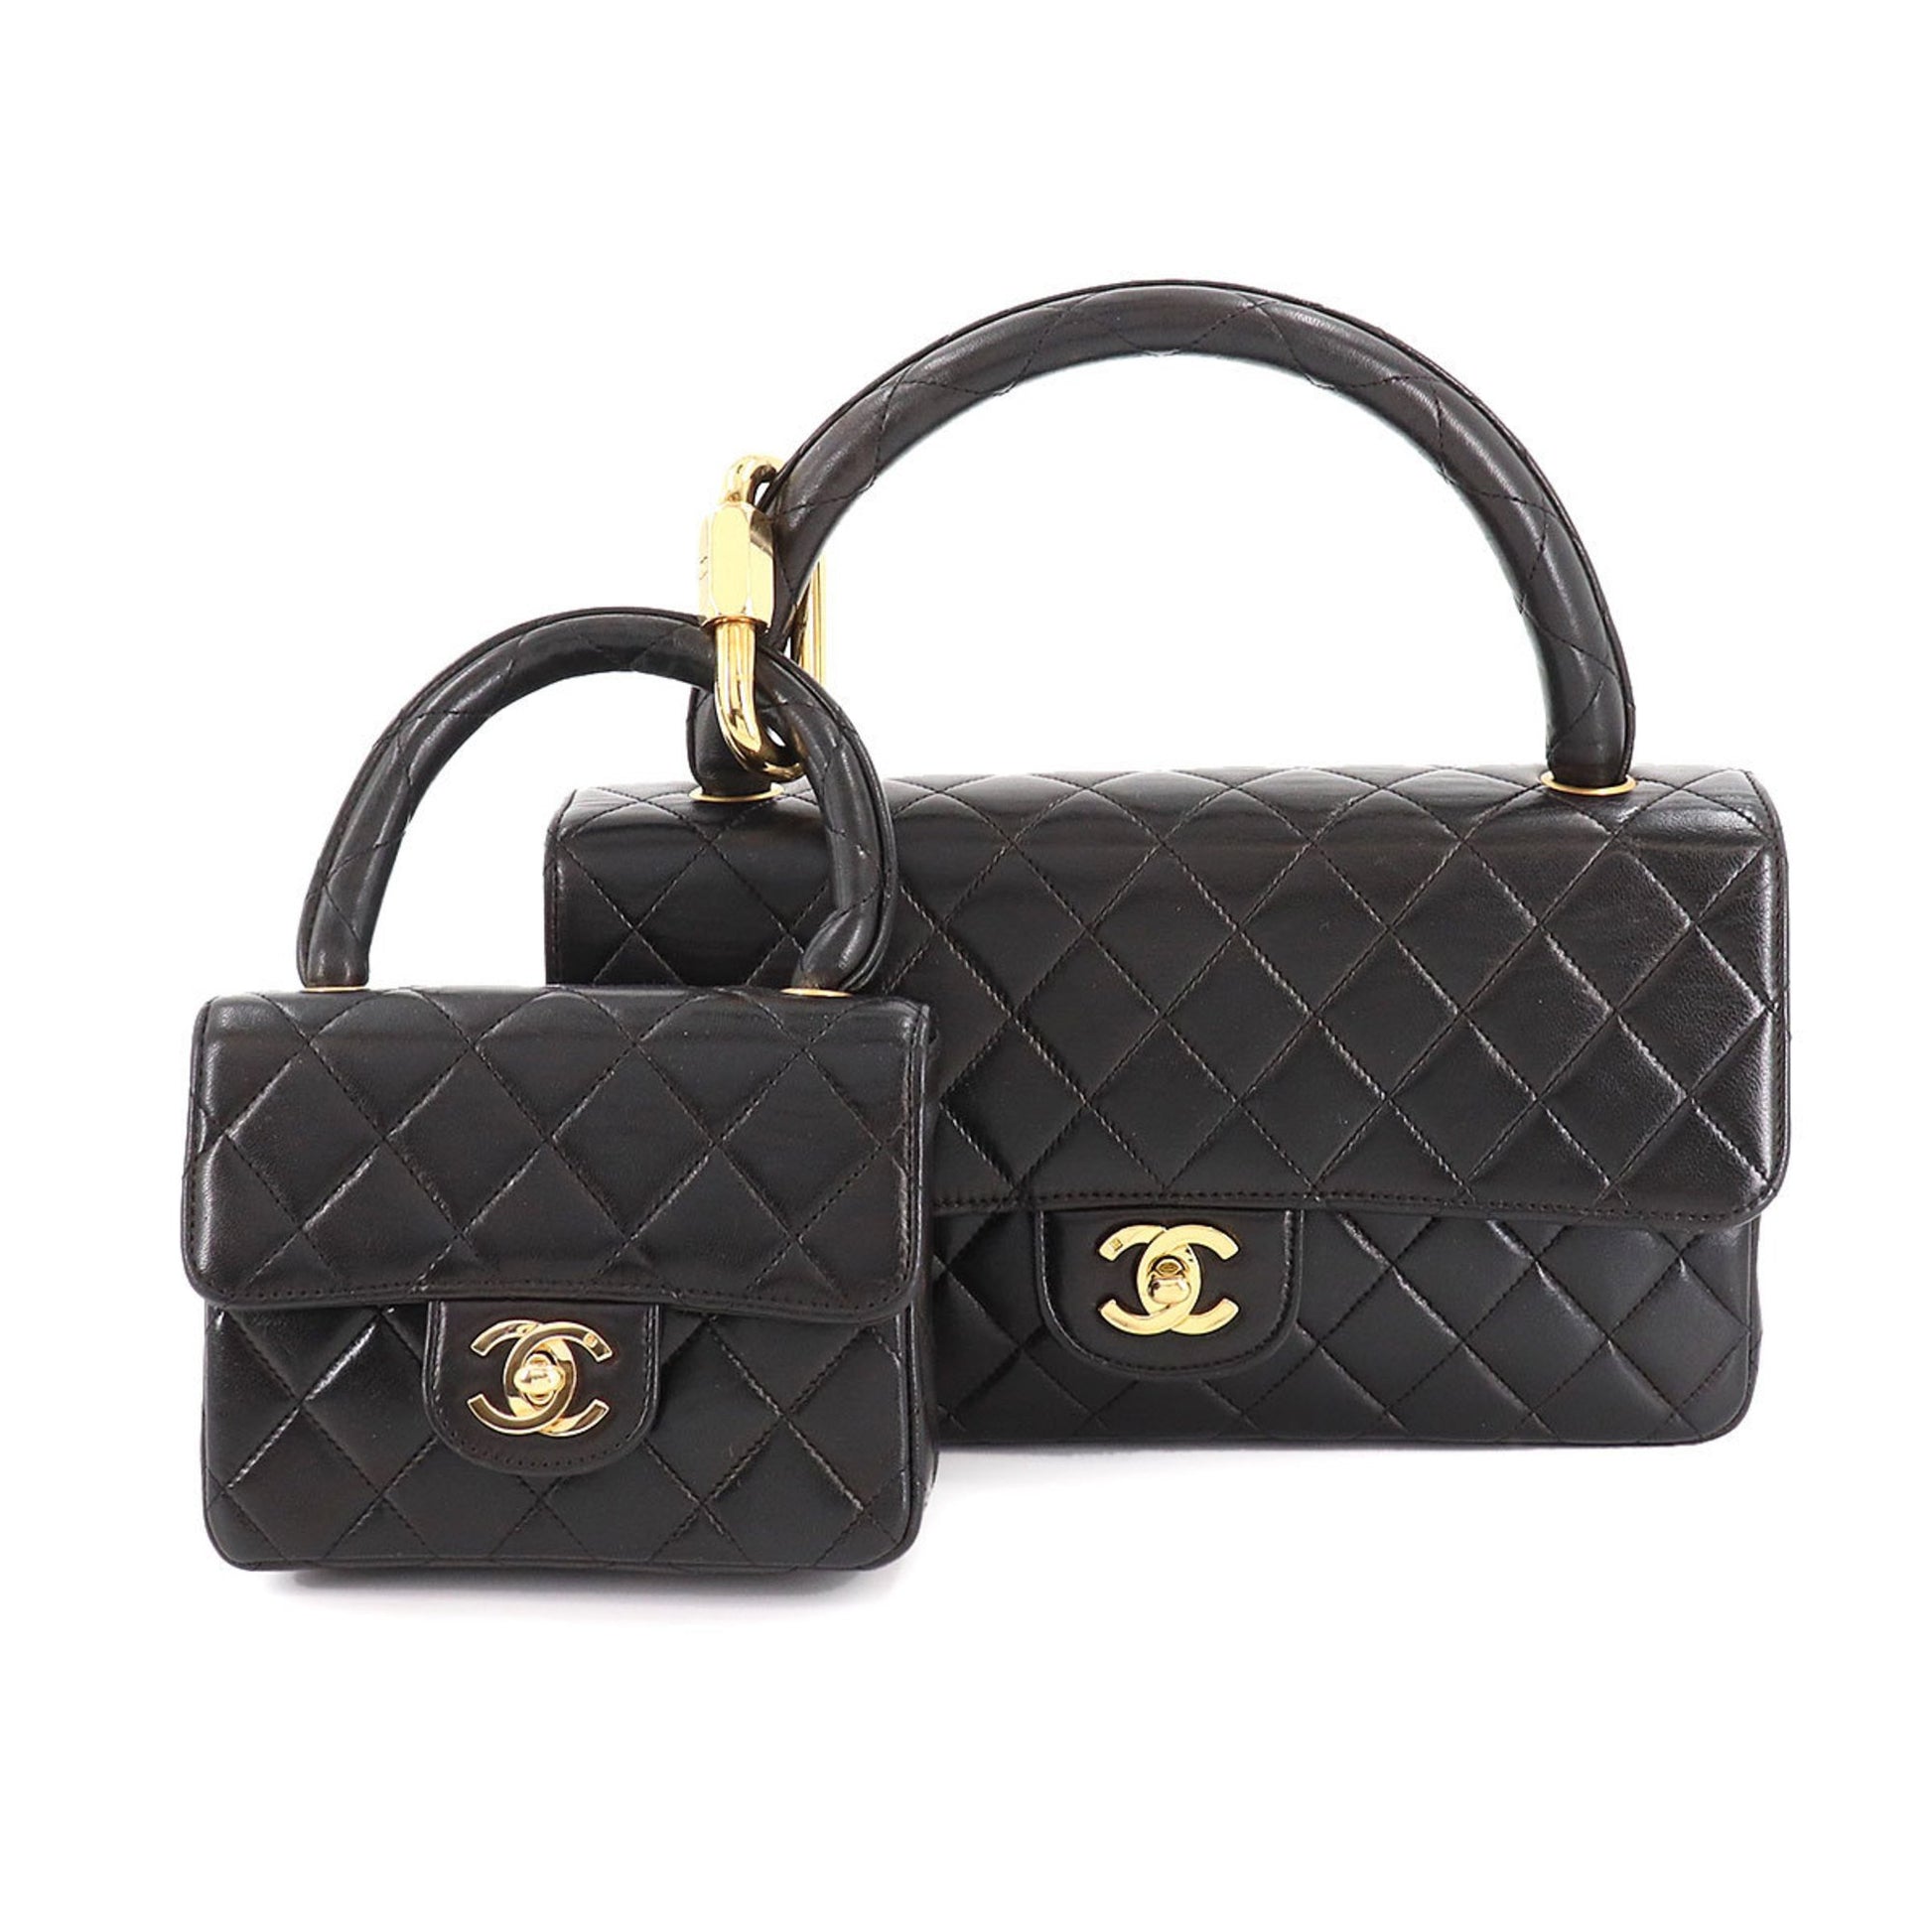 Chanel matelasse parent and child bag hand leather black gold